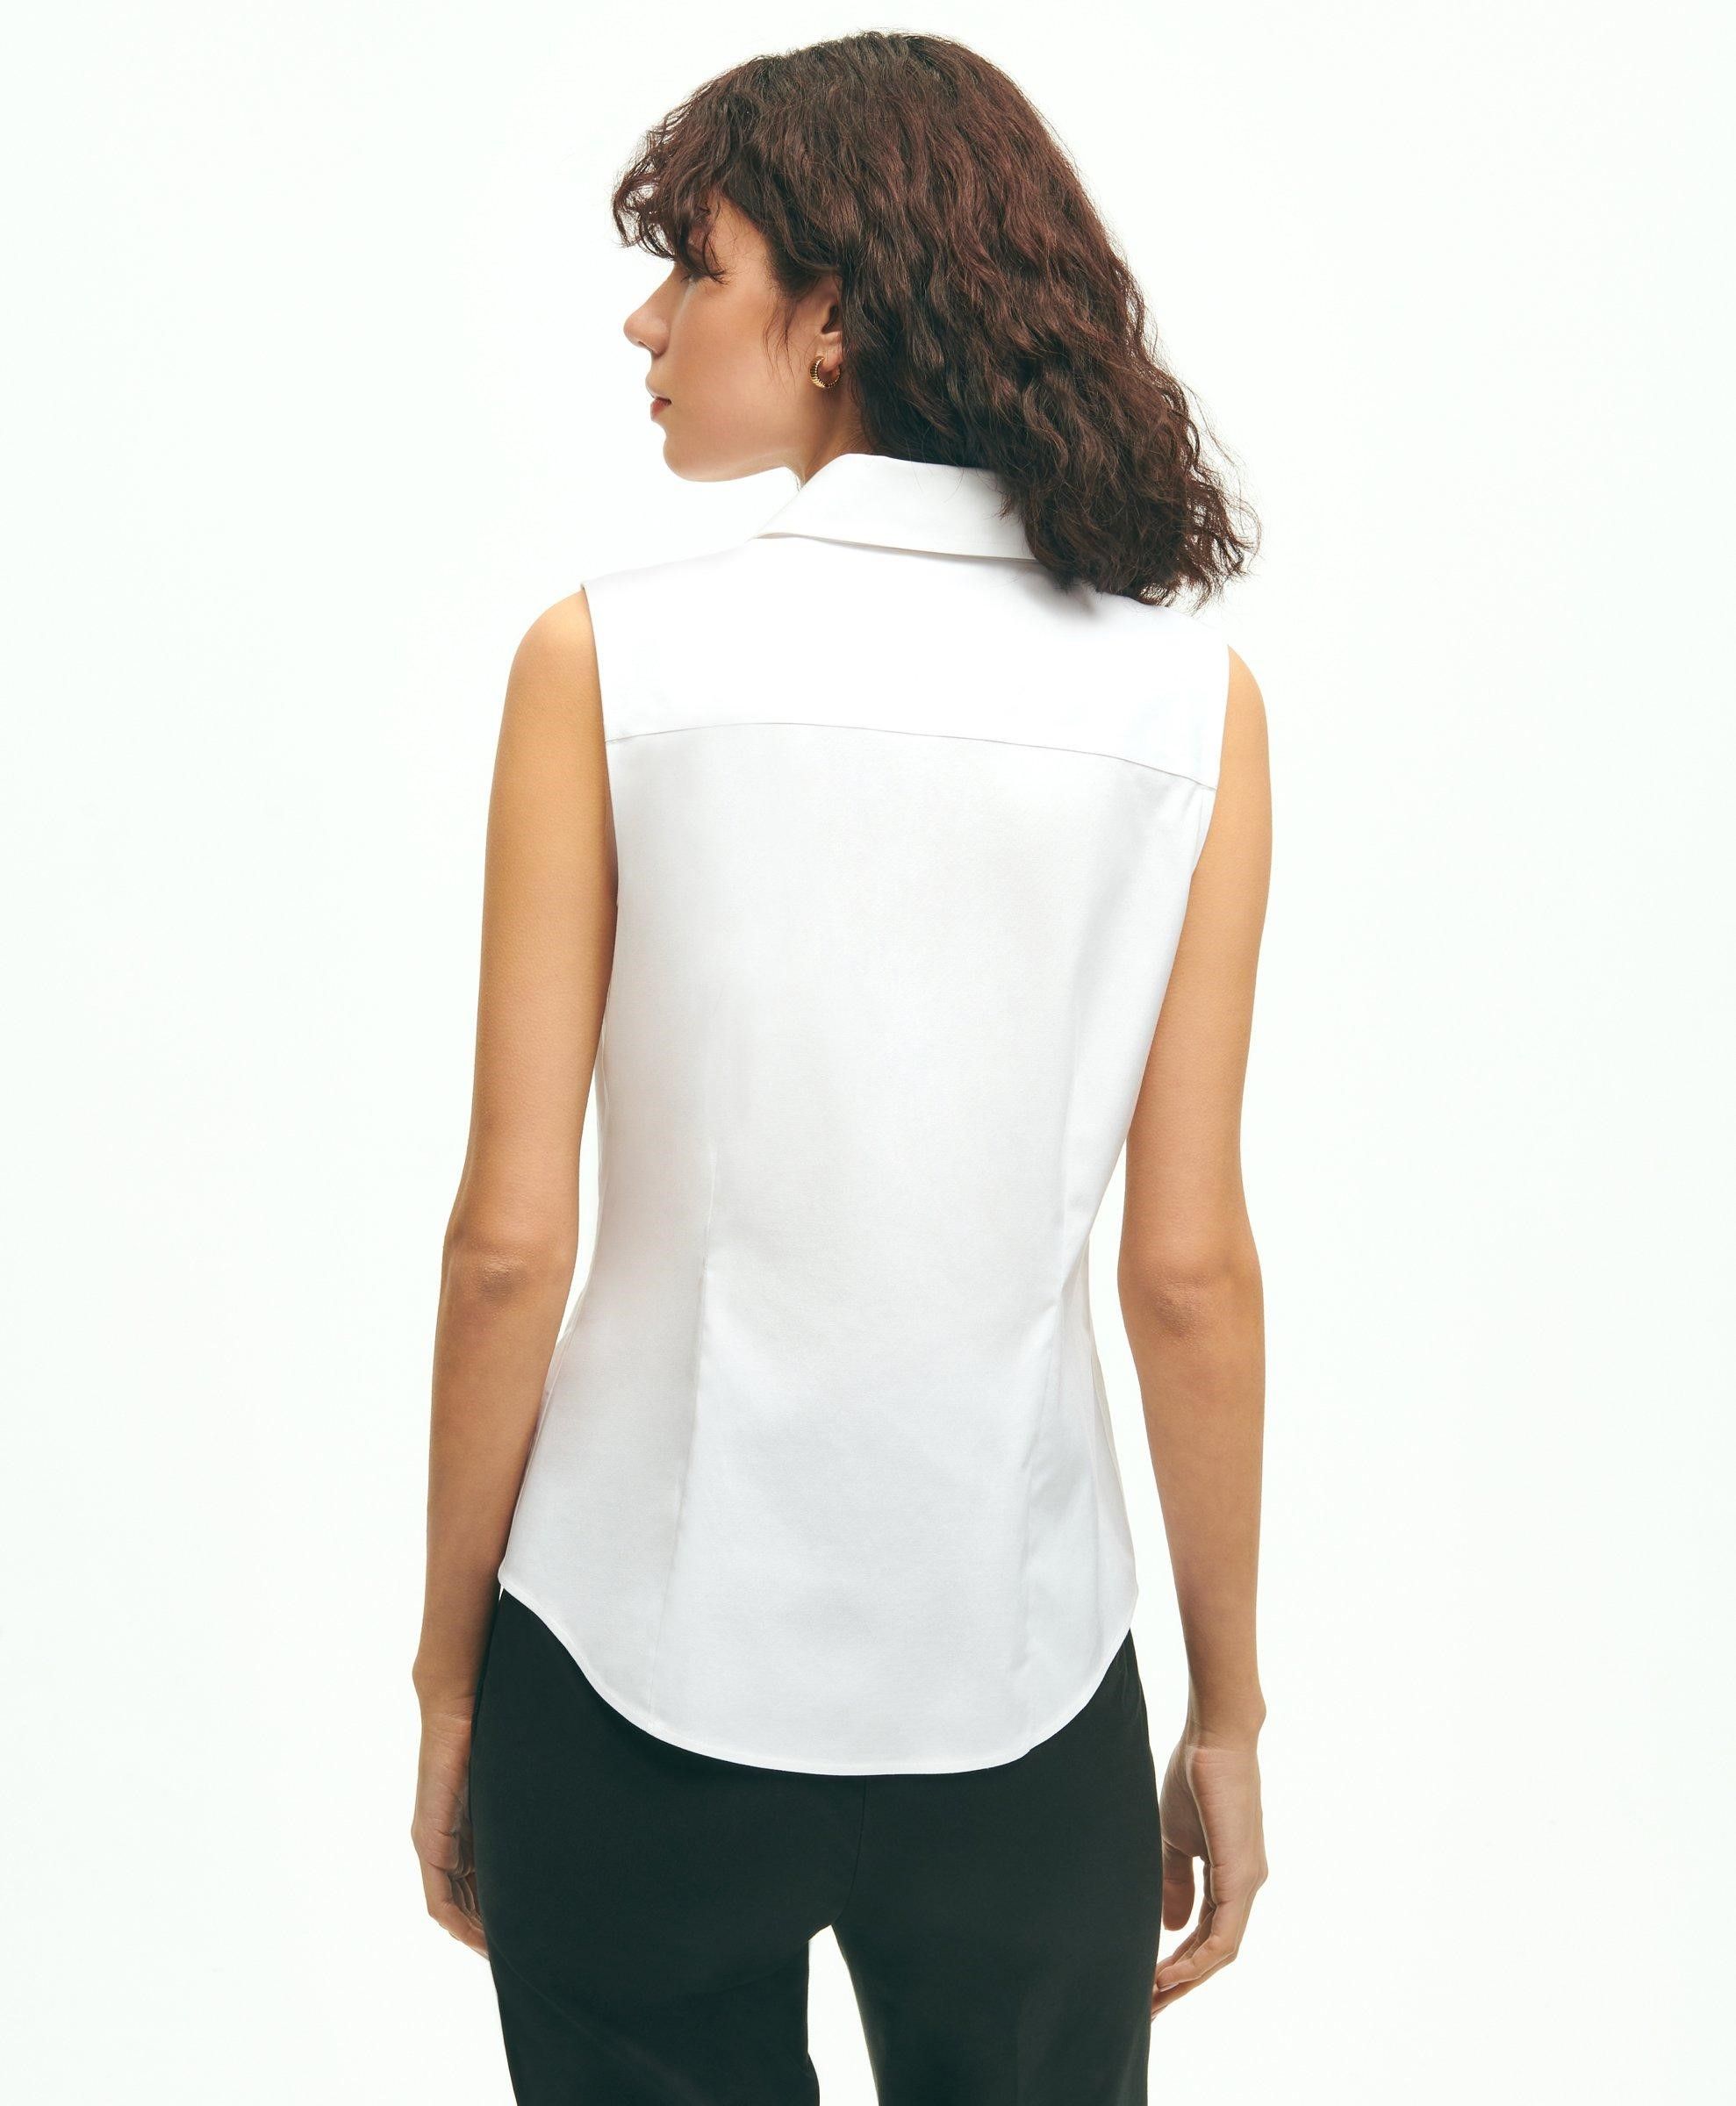 The Essential Brooks Brothers Stretch Wool Peplum Top